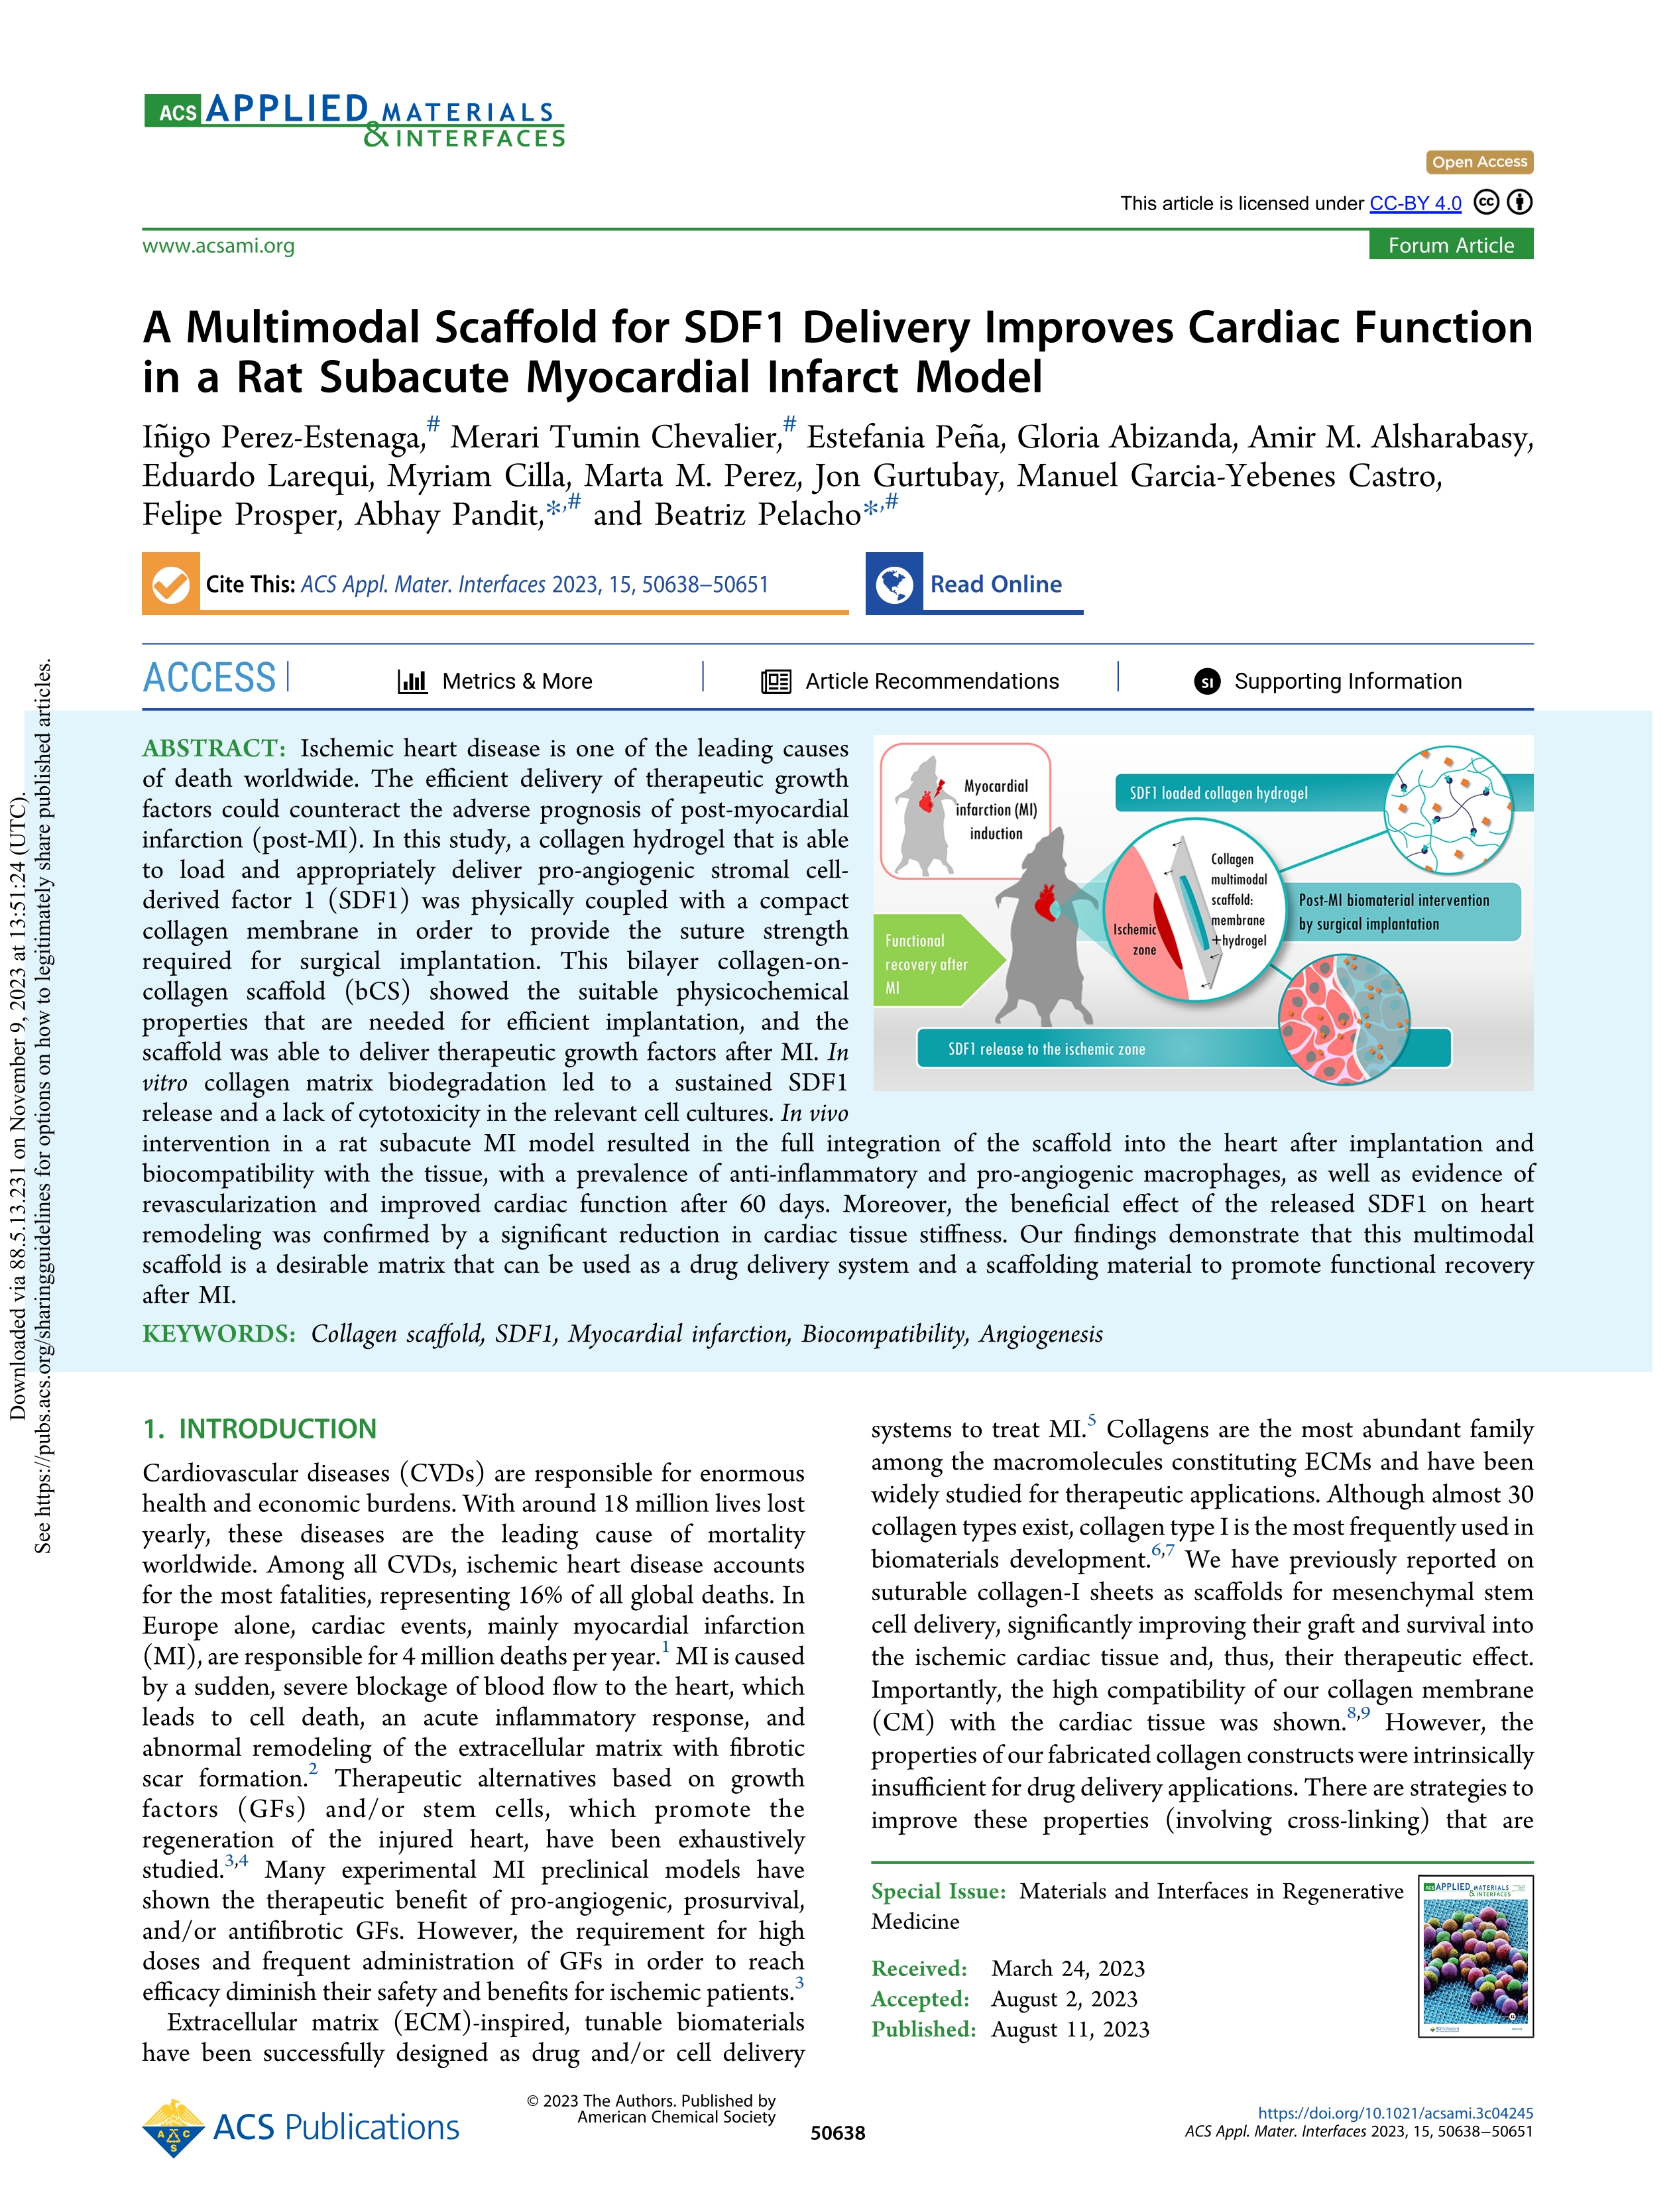 A Multimodal Scaffold for SDF1 Delivery Improves Cardiac Function in a Rat Subacute Myocardial Infarct Model